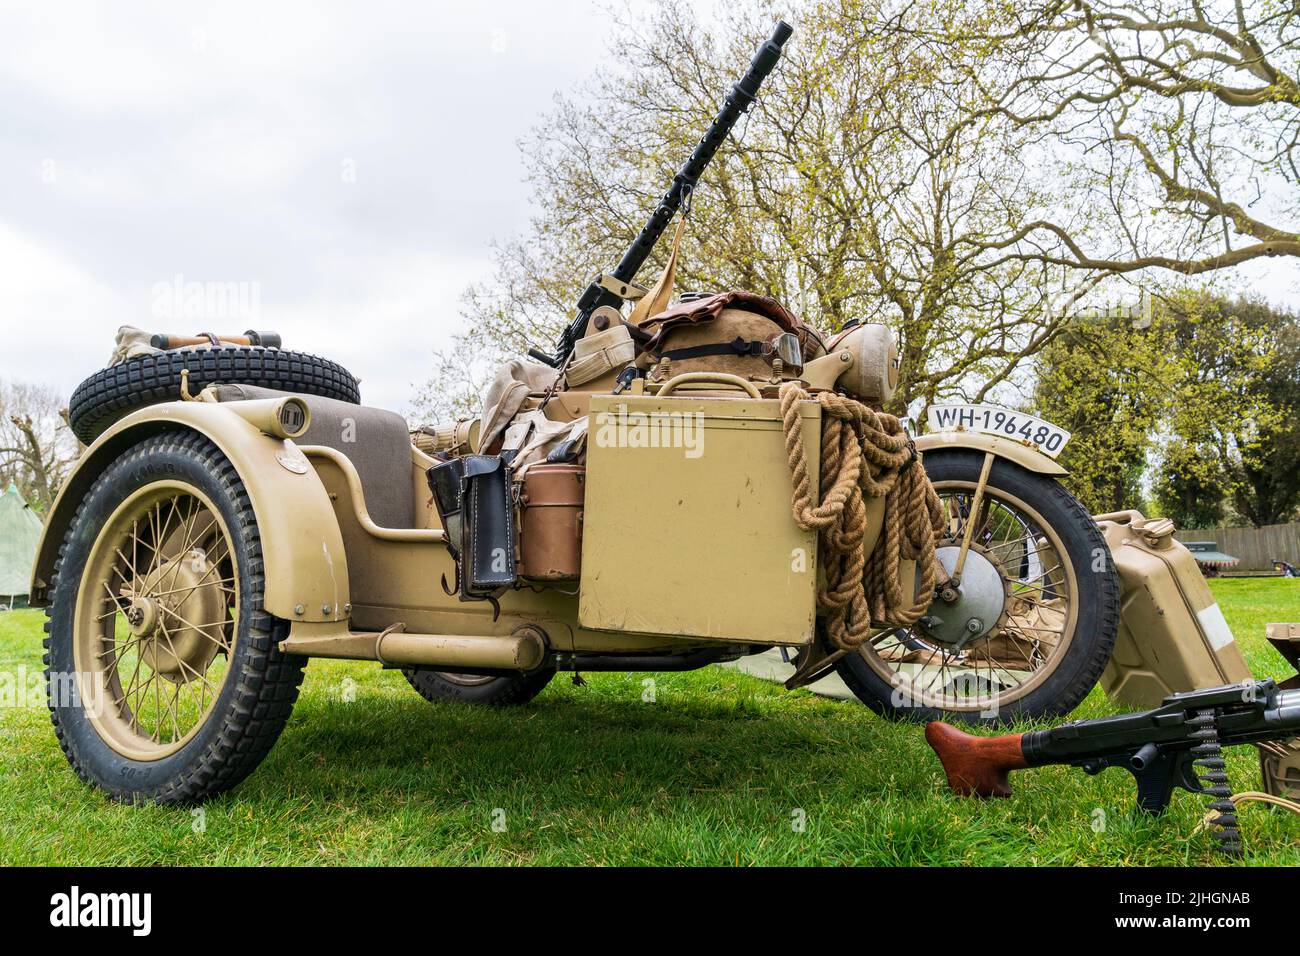 World war two vintage German motorcycle and side car with mounted MG34 machine gun. Painted yellow-green for afrika korps desert camouflage. Stock Photo